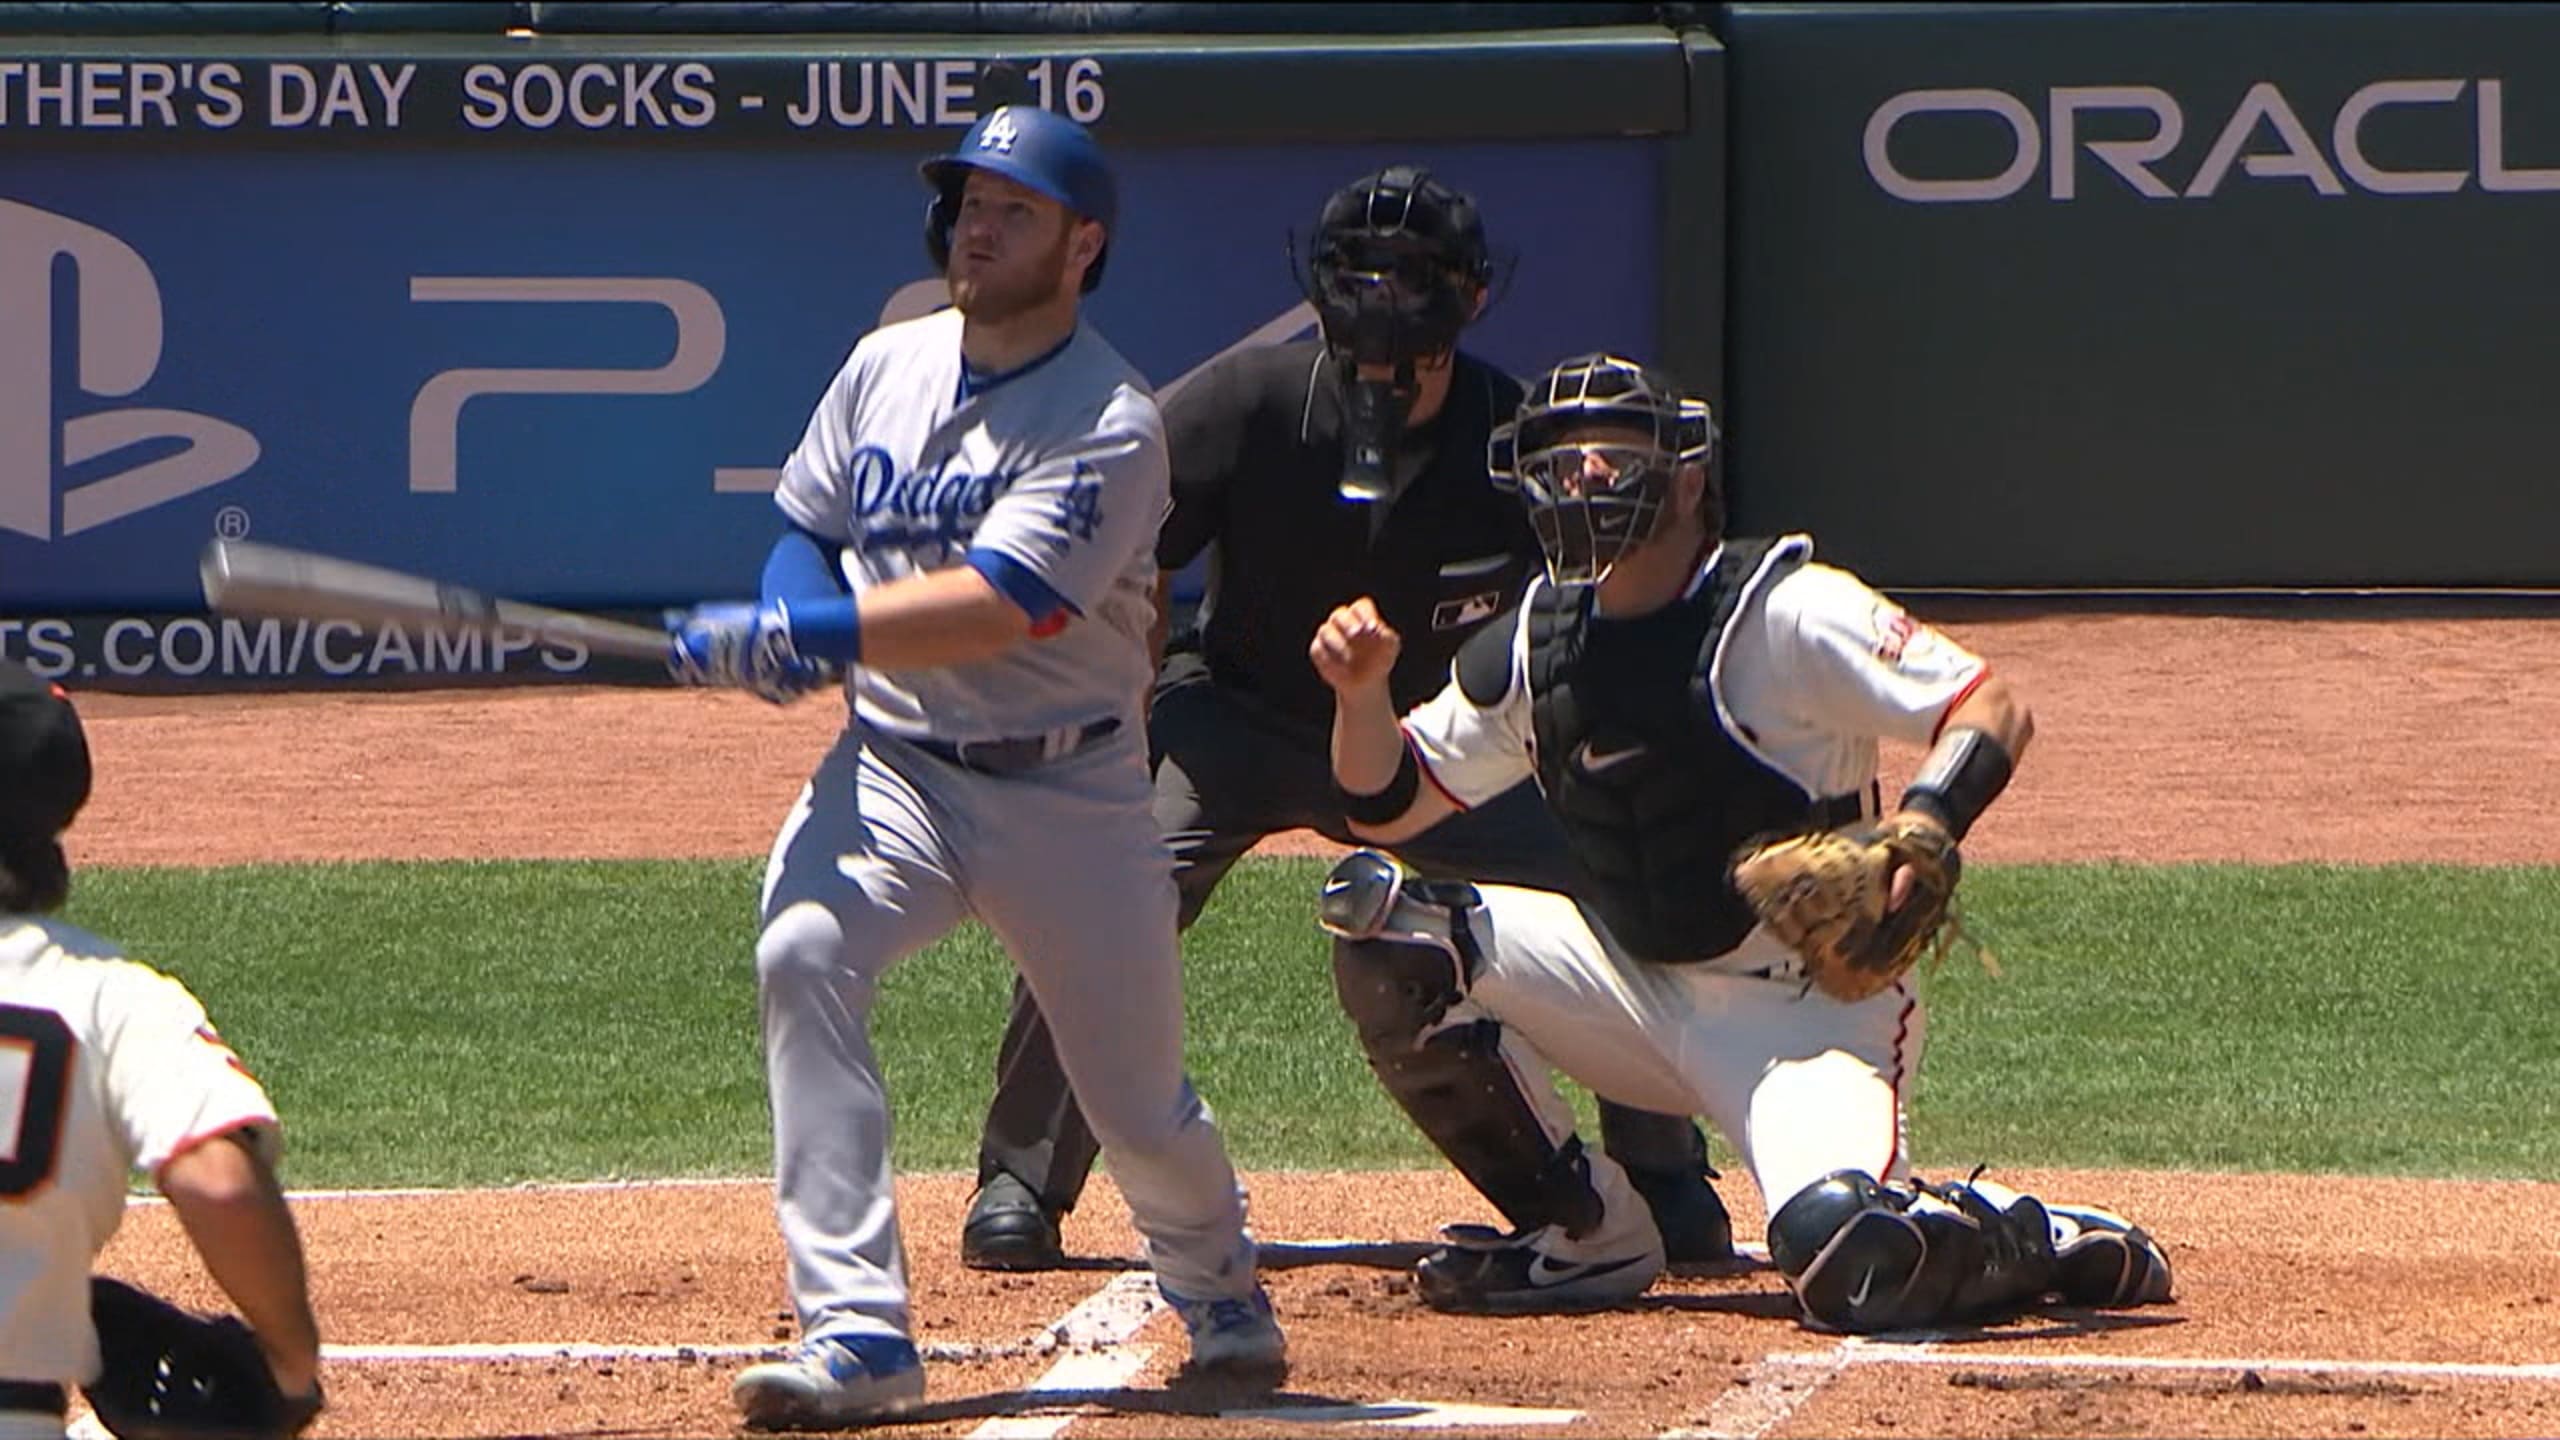 Dodgers' Max Muncy literally pummeled Madison Bumgarner out of a job